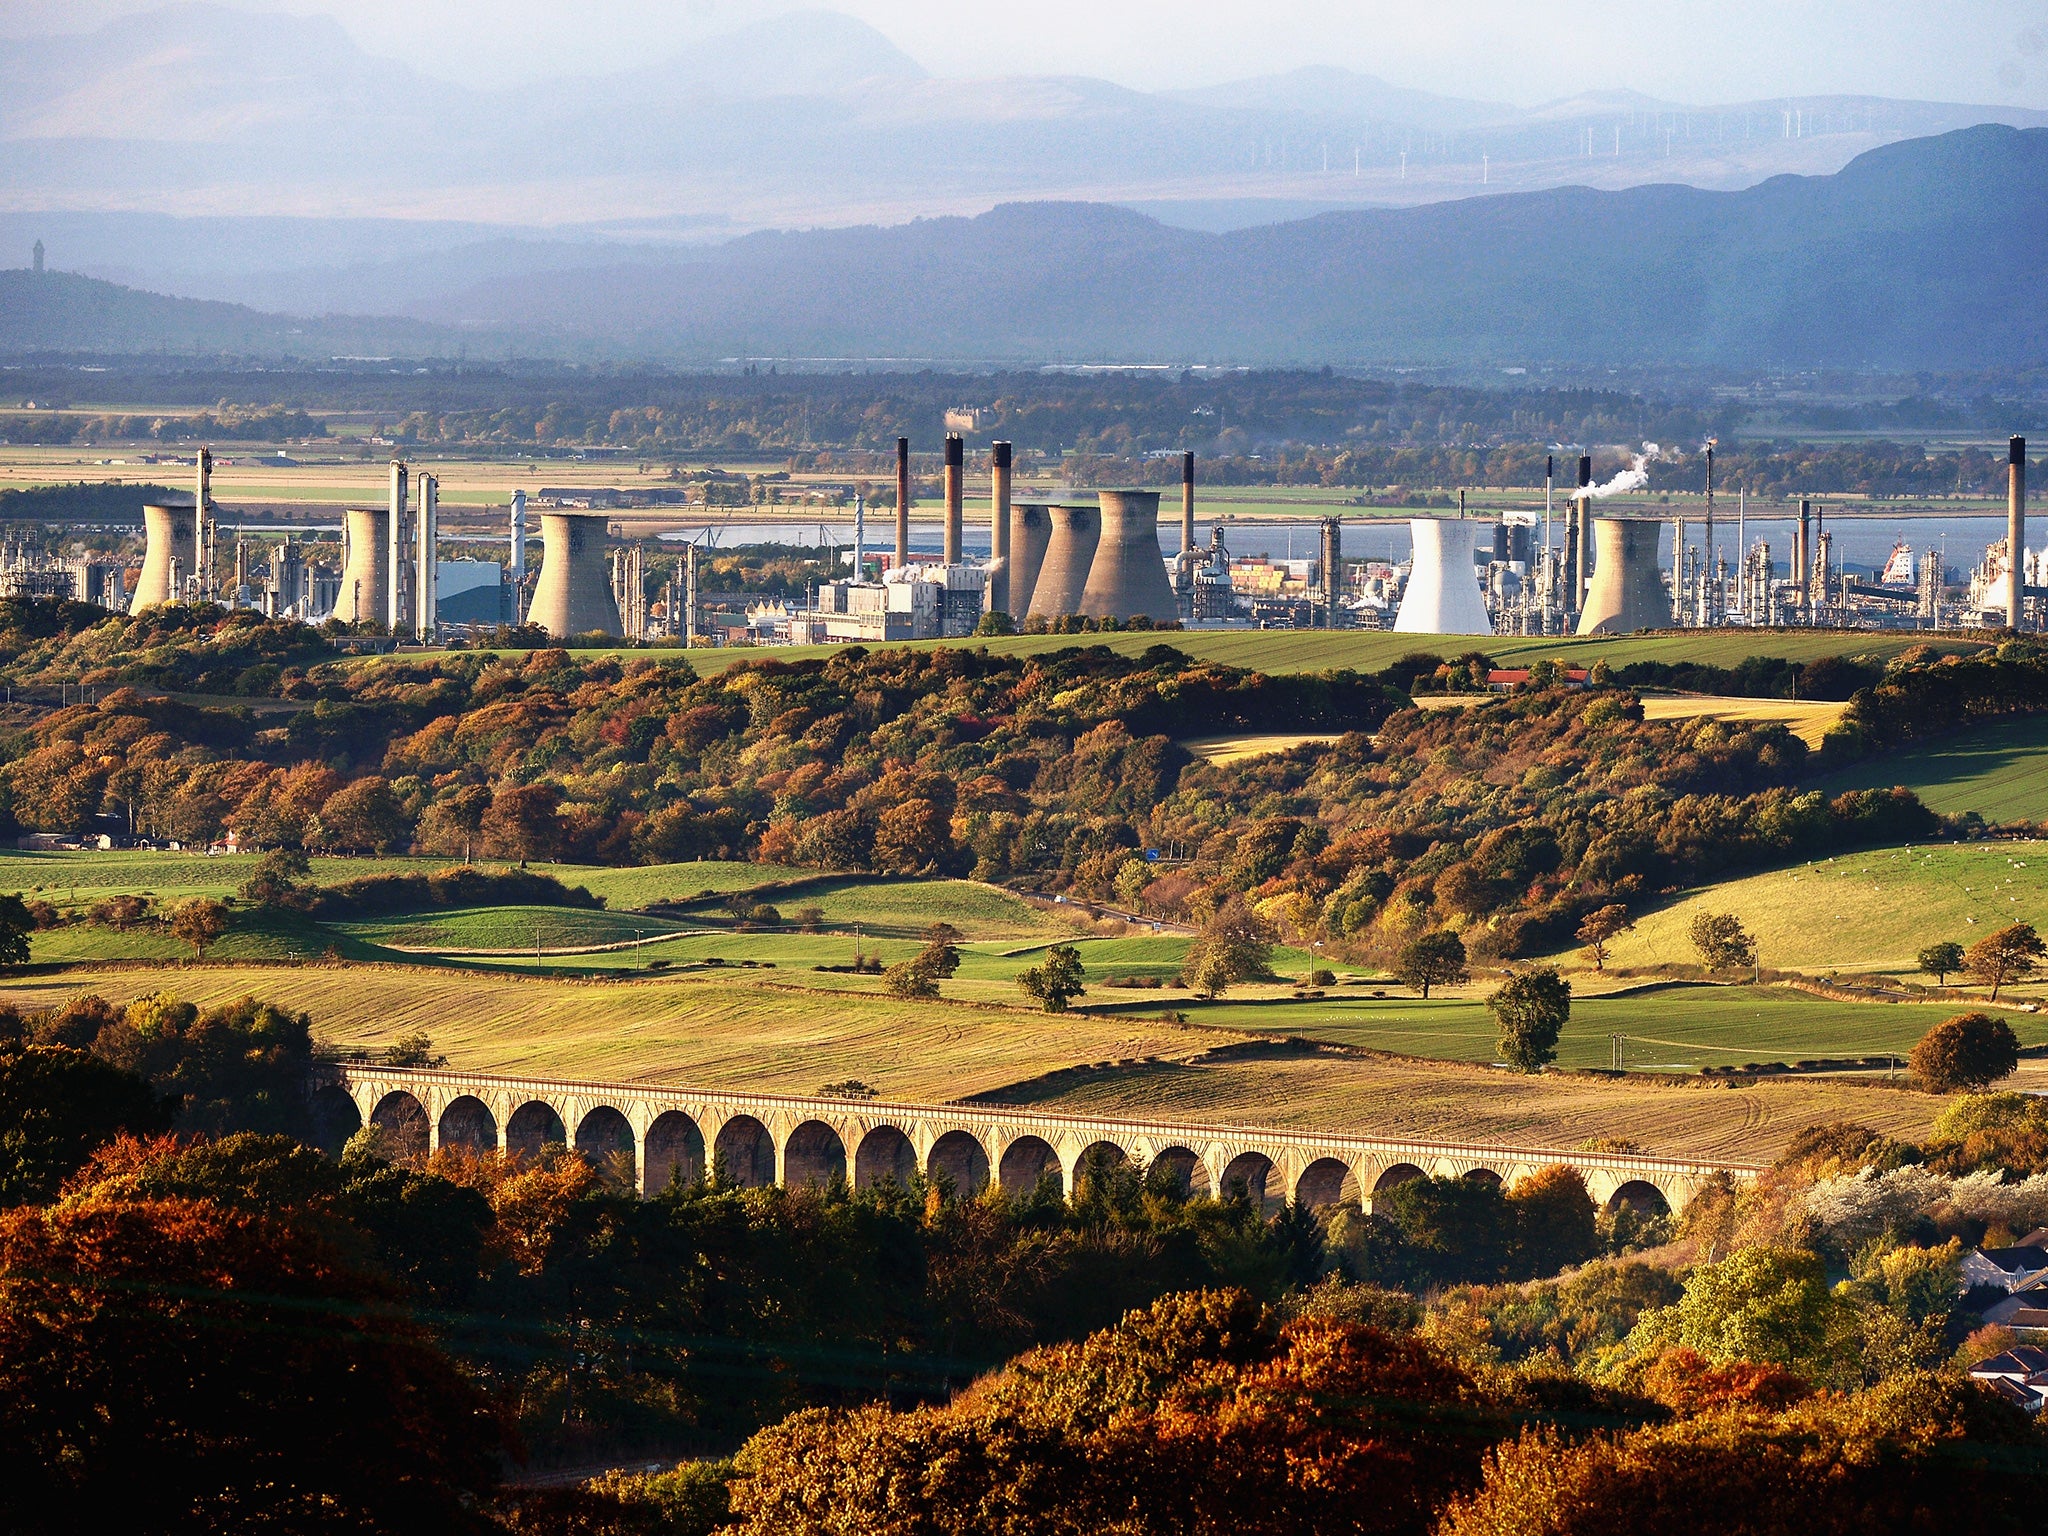 Fields of dreams: the Grangemouth refining and petrochemical complex in Scotland, which Ineos hopes to power one day through shale energy extracted from under the neighbouring land